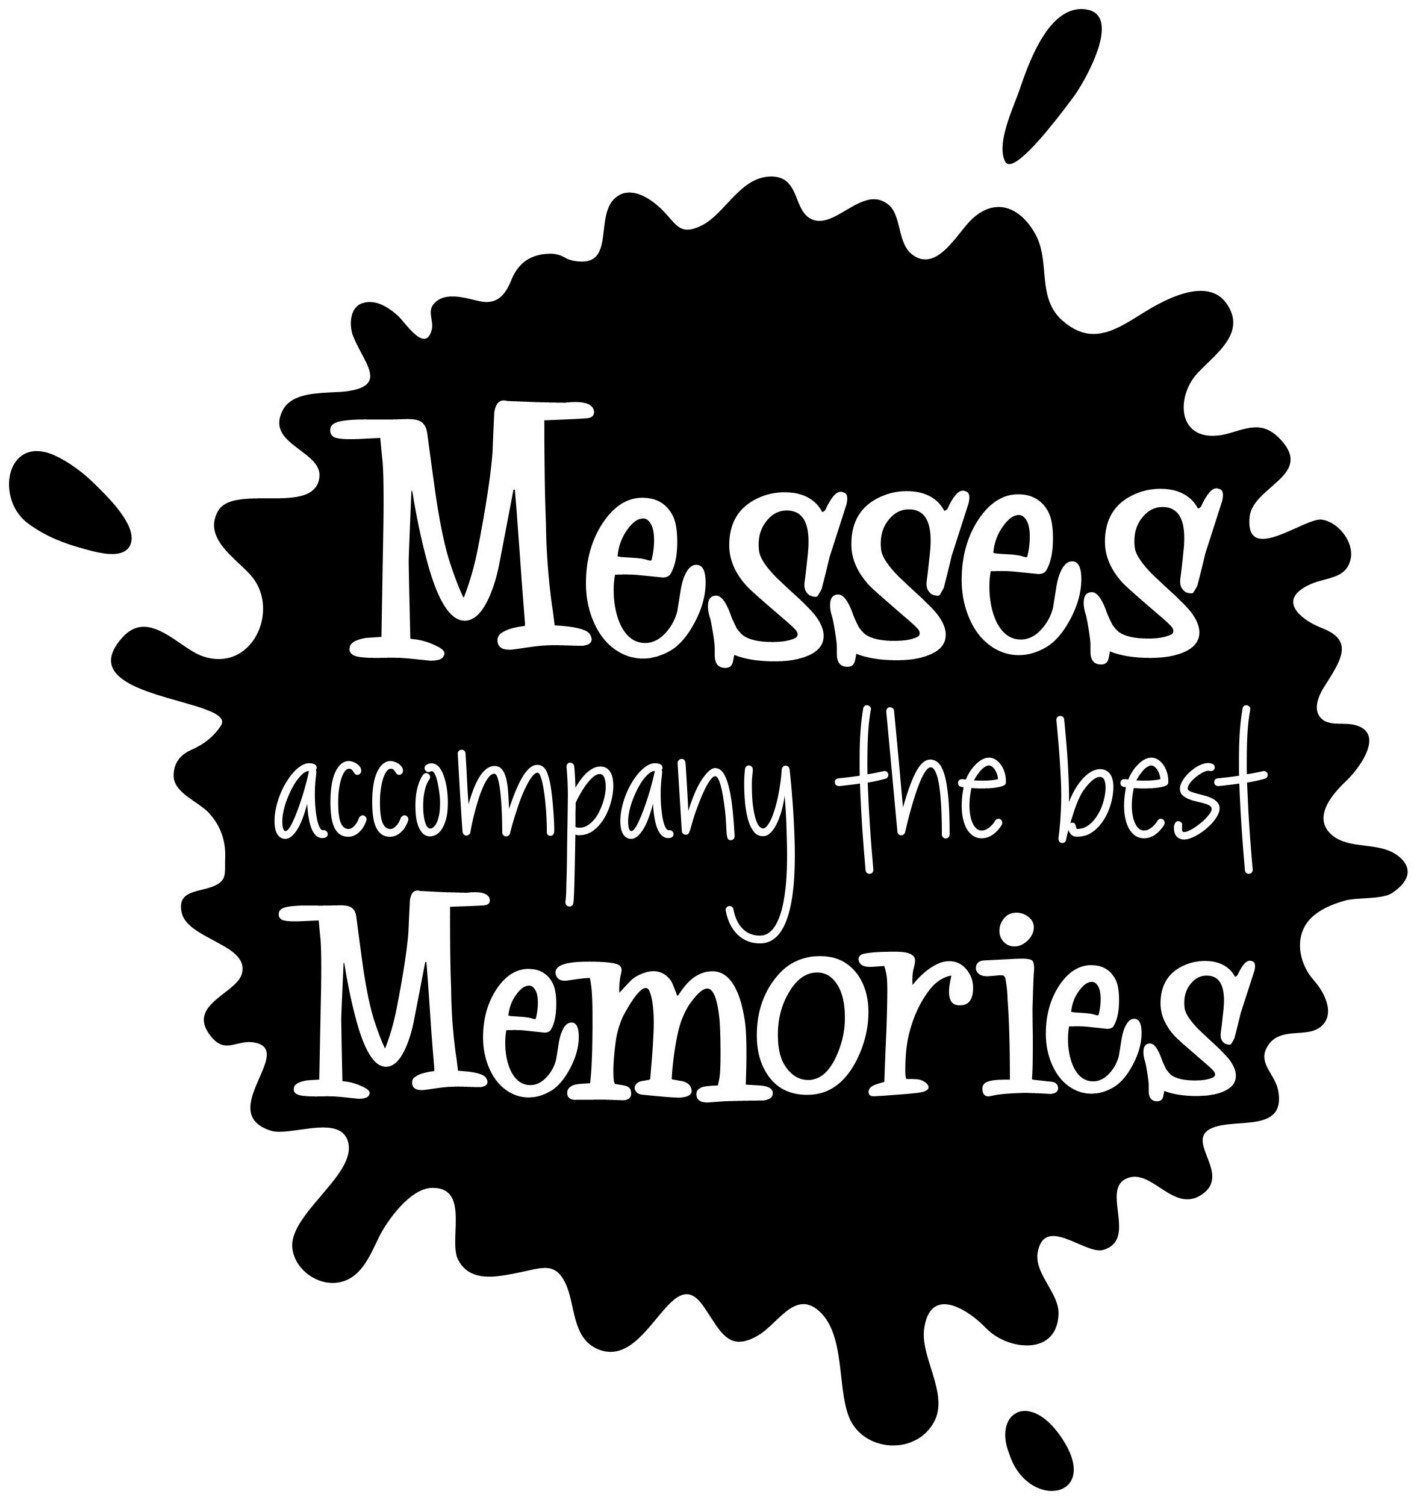 Messes Accompany the Best Memories Vinyl Wall Decal for Children's Playroom or Art, Scrapbooking, Cardmaking, Sewing, and Craft Rooms